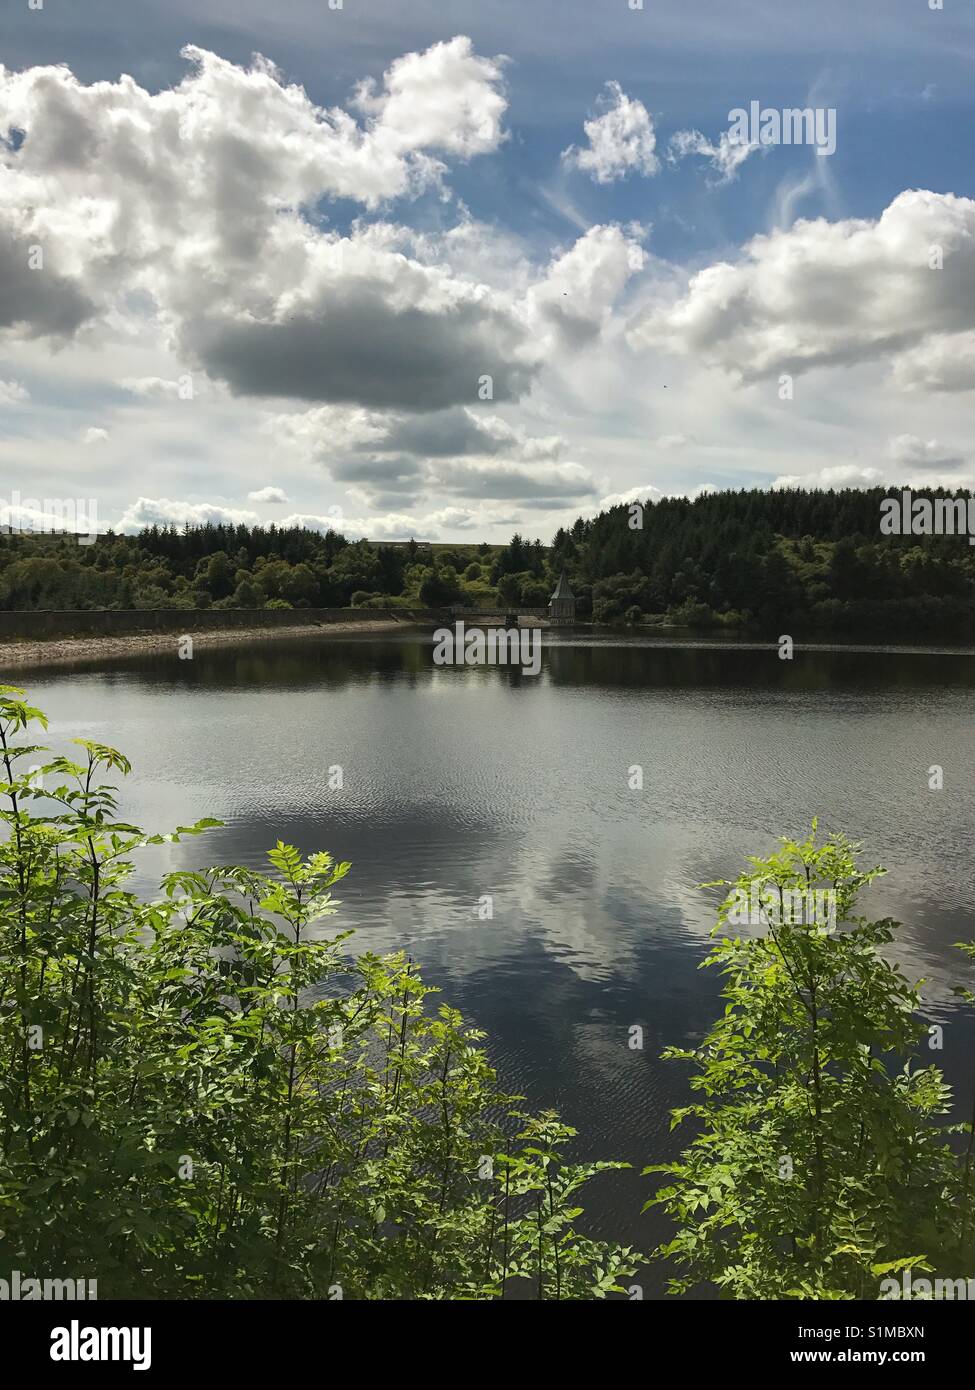 Ponsticill reservoir, near Merthyr Tydfil, Wales - August 2017: Scenic view of the still waters of the reservoir looking towards the wall of the dam Stock Photo